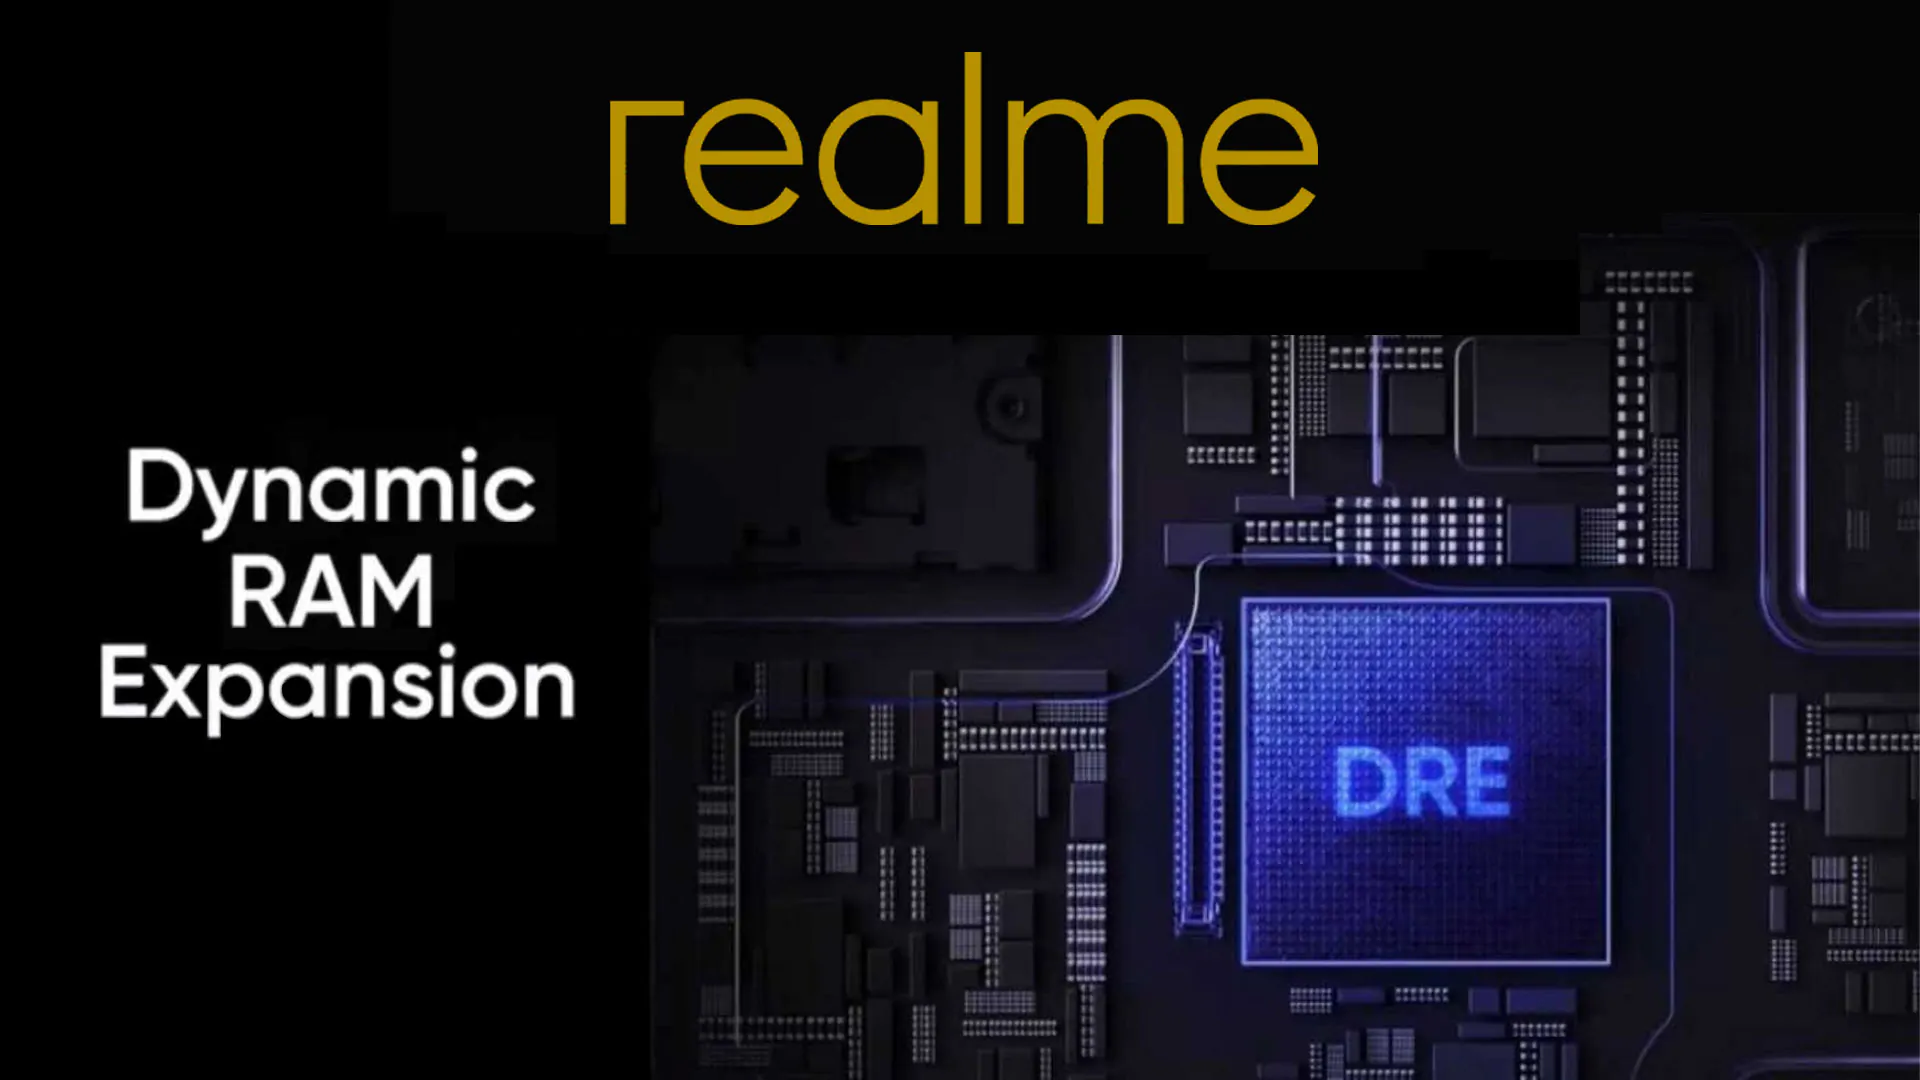 39 Realme smartphones receive support for expanding Dynamic RAM